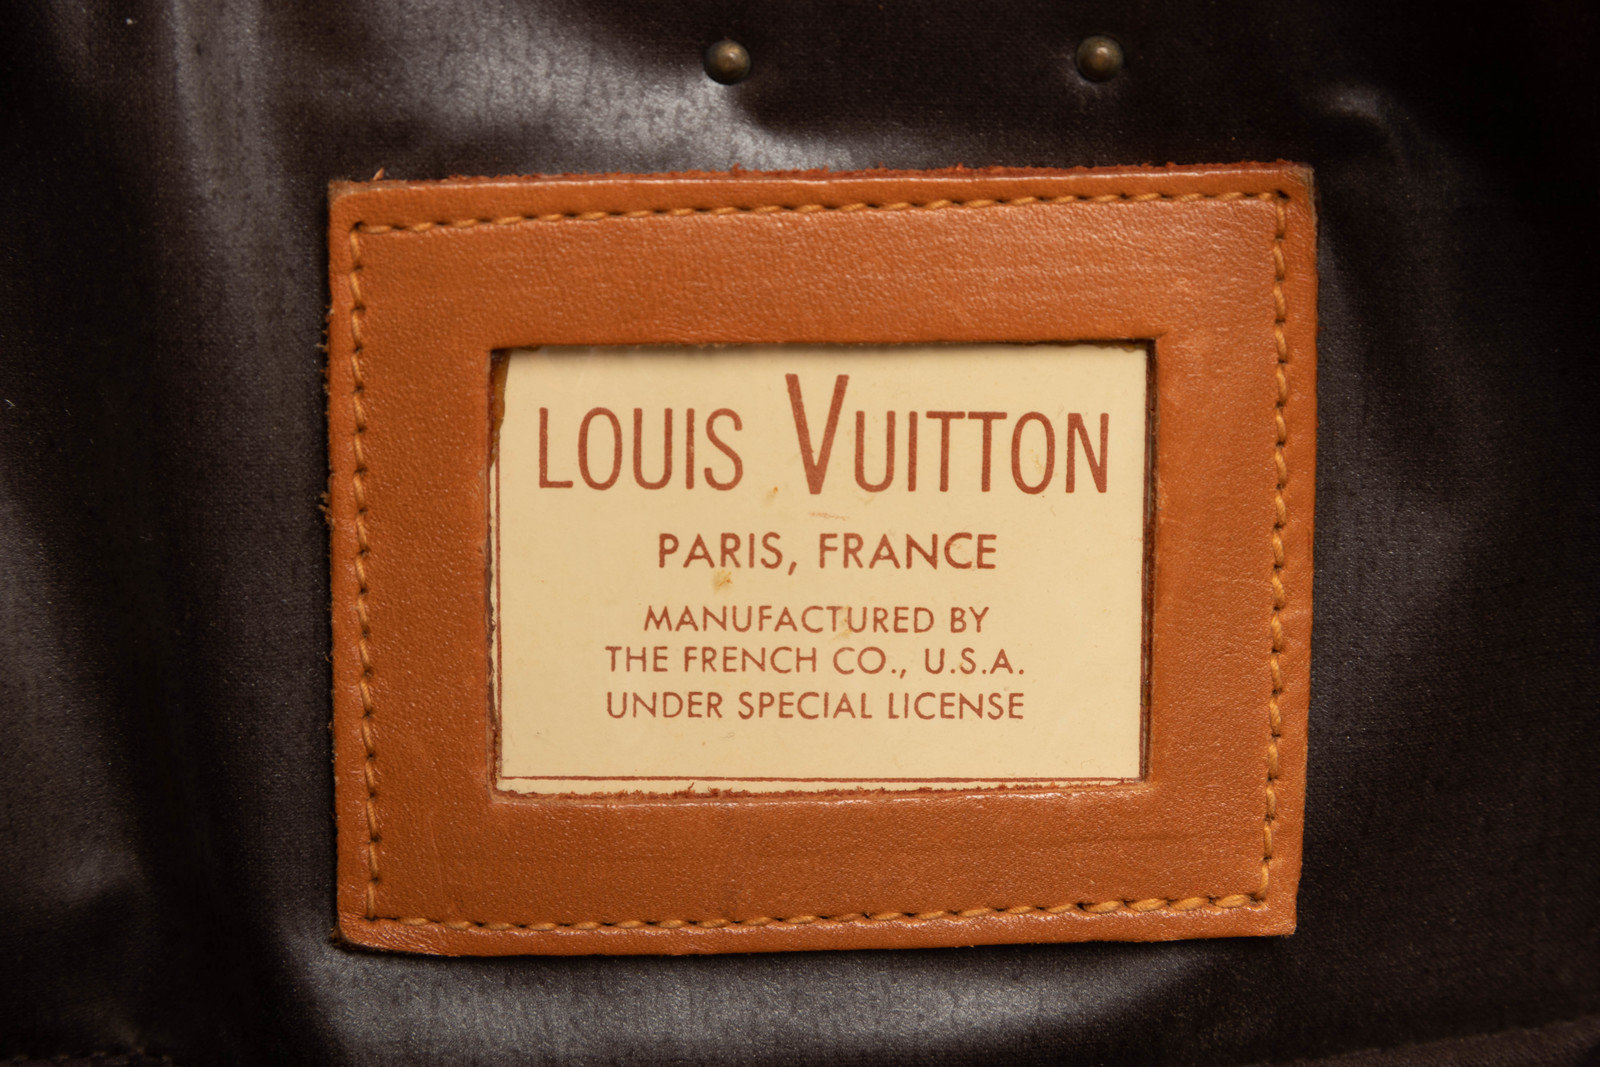 Sold at Auction: Lot of 10 Vintage Louis Vuitton Leather Luggage Tags